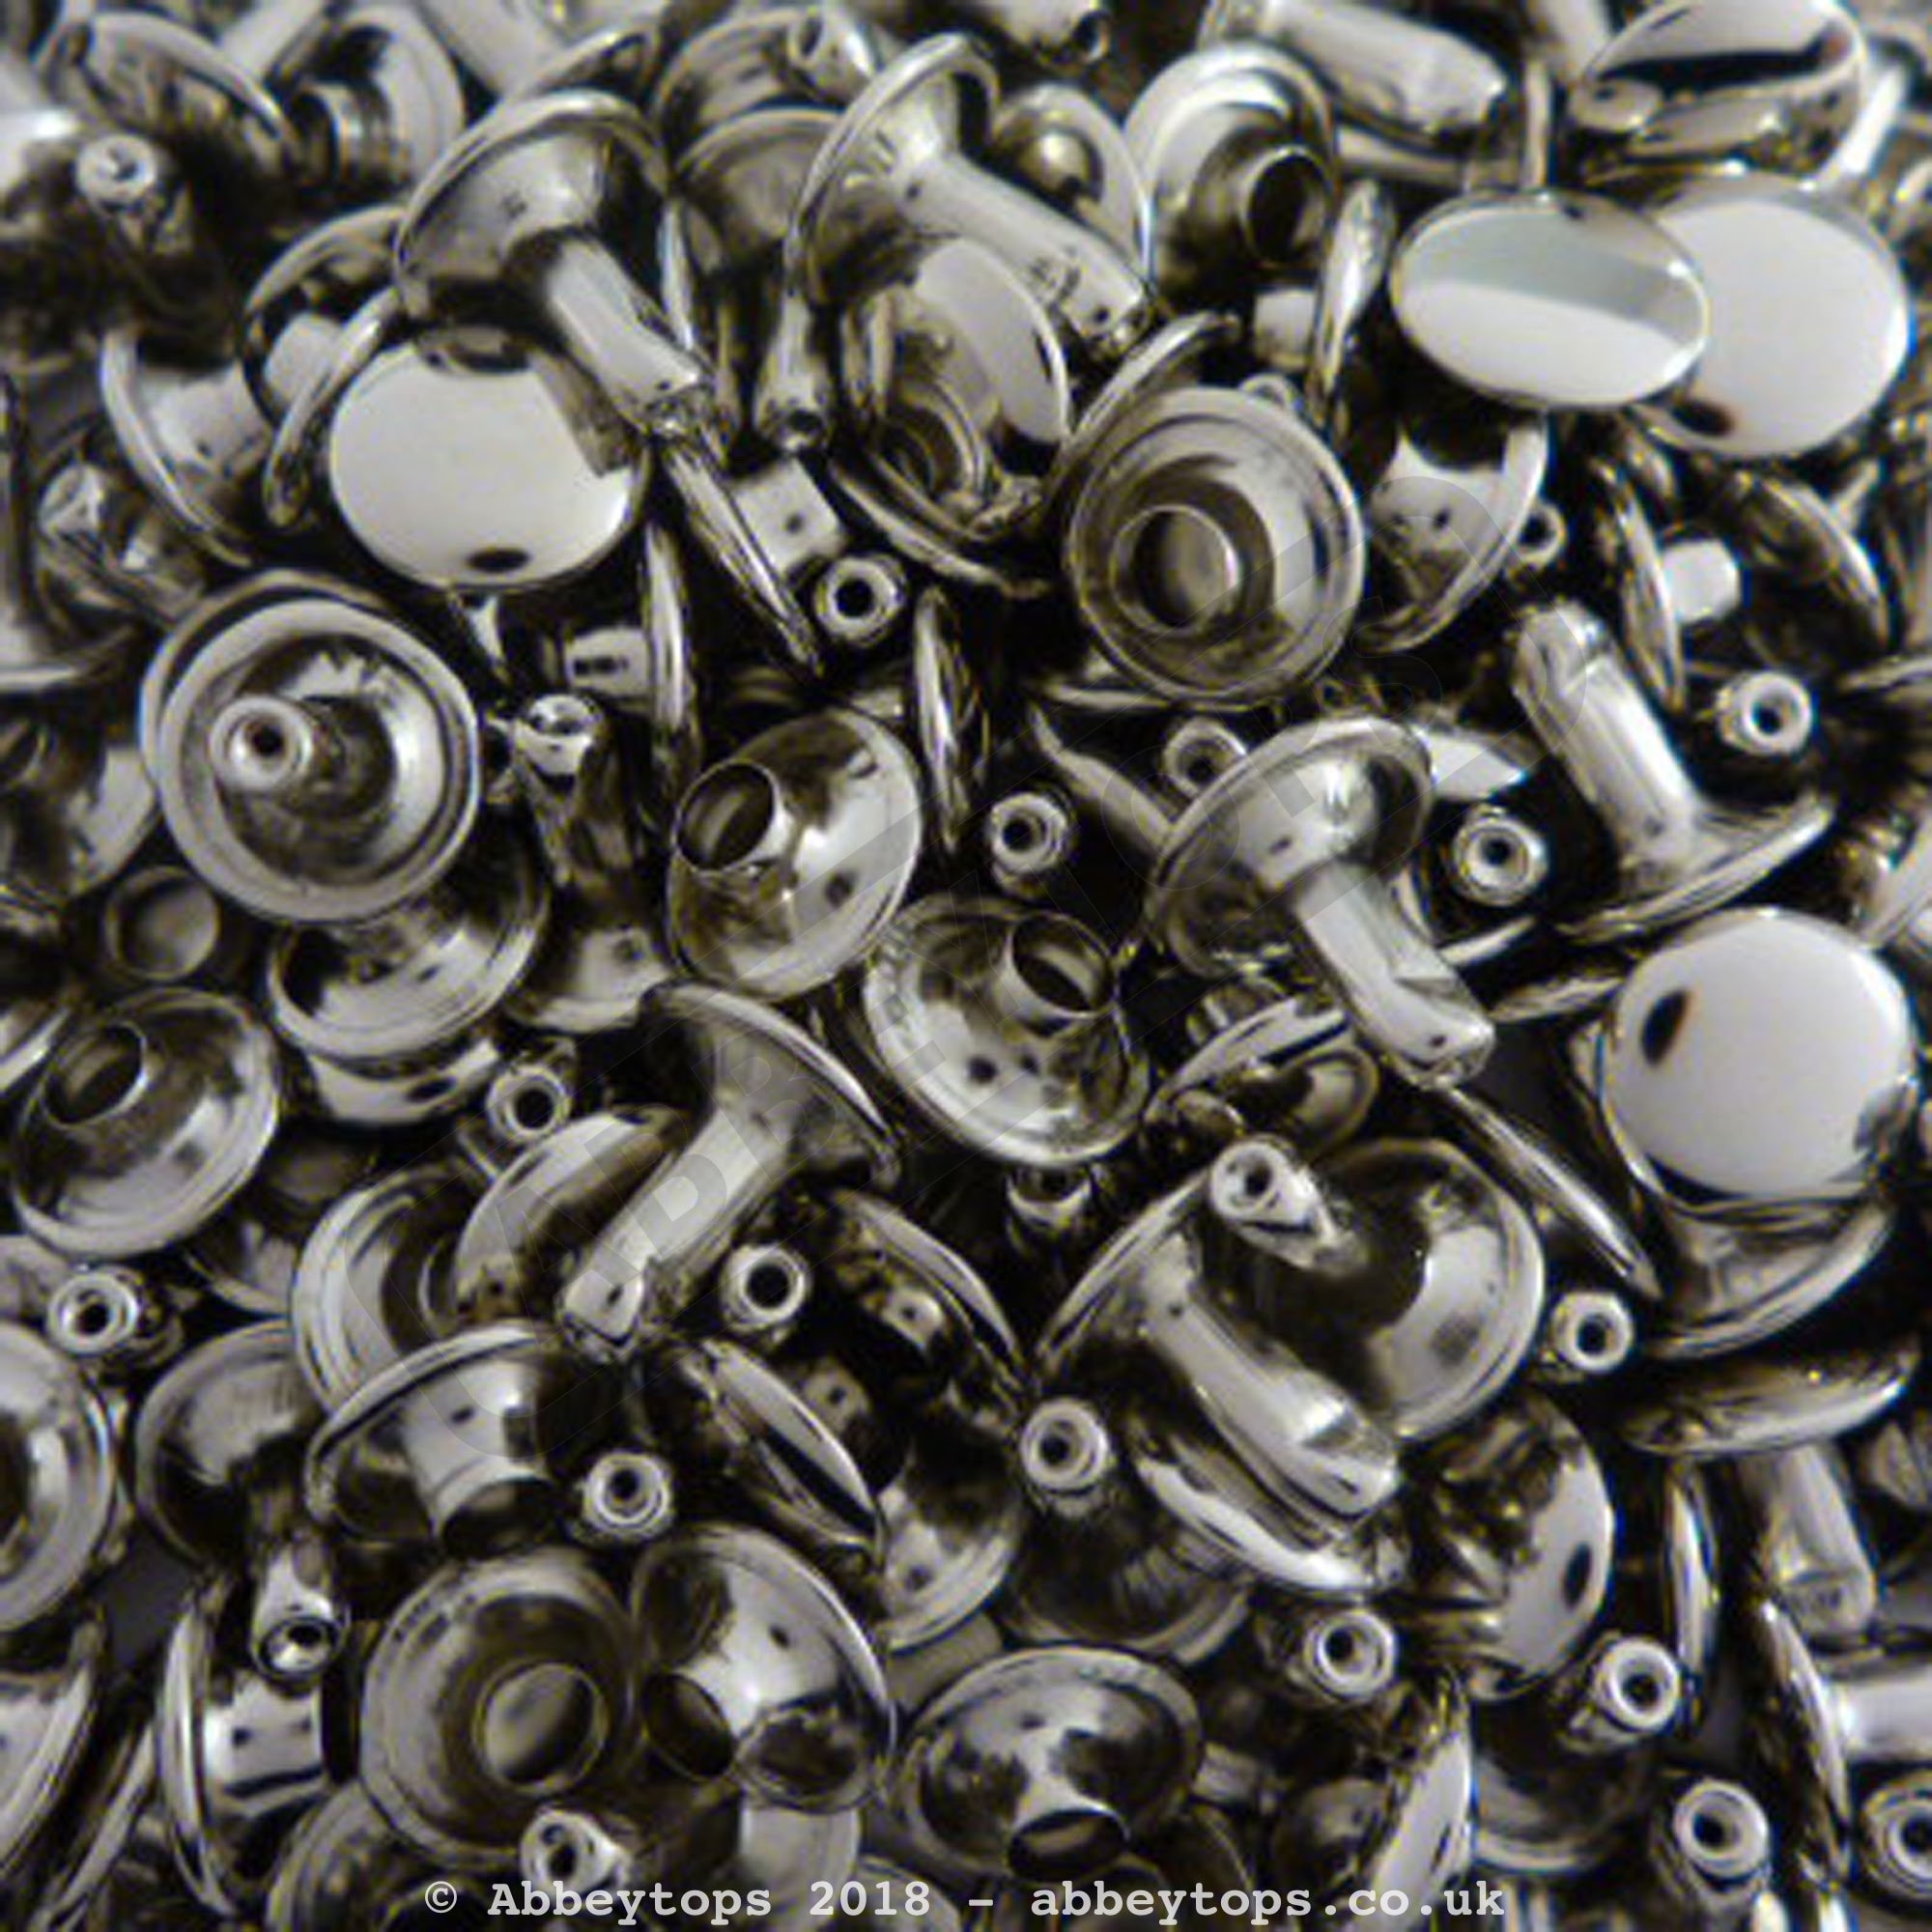 Uxcell 50 Sets Leather Rivets 8mm Double Cap Rivets 12mm Height Studs Silver Tone, Size: Small